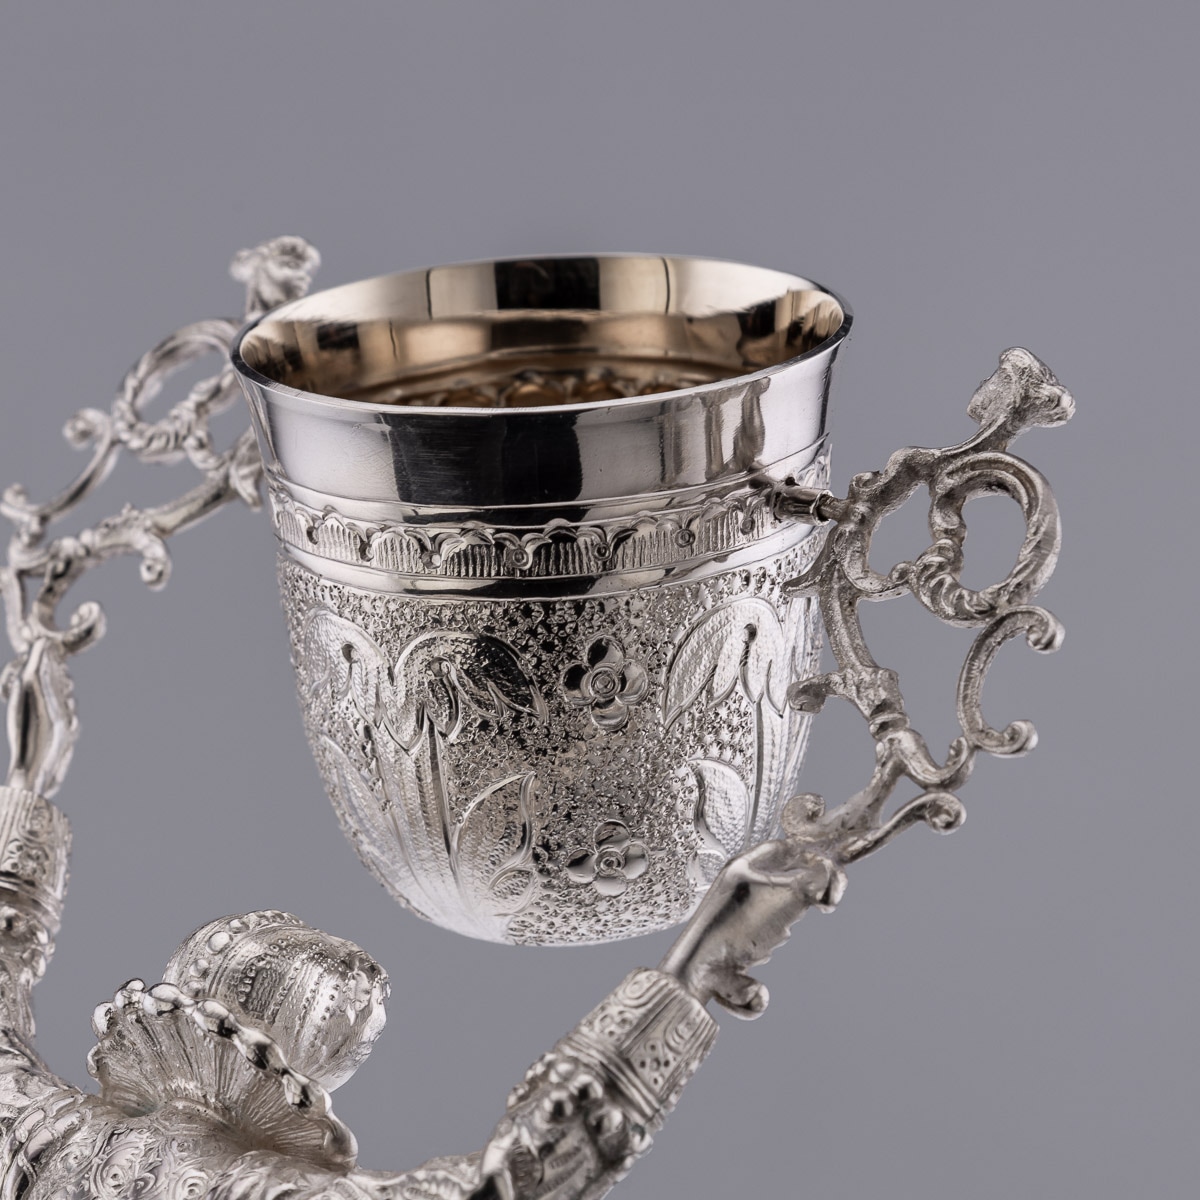 A ROYAL WEDDING SOLID STERLING SILVER NOVELTY WAGER CUP, LONDON, C. 1973 - Image 11 of 23